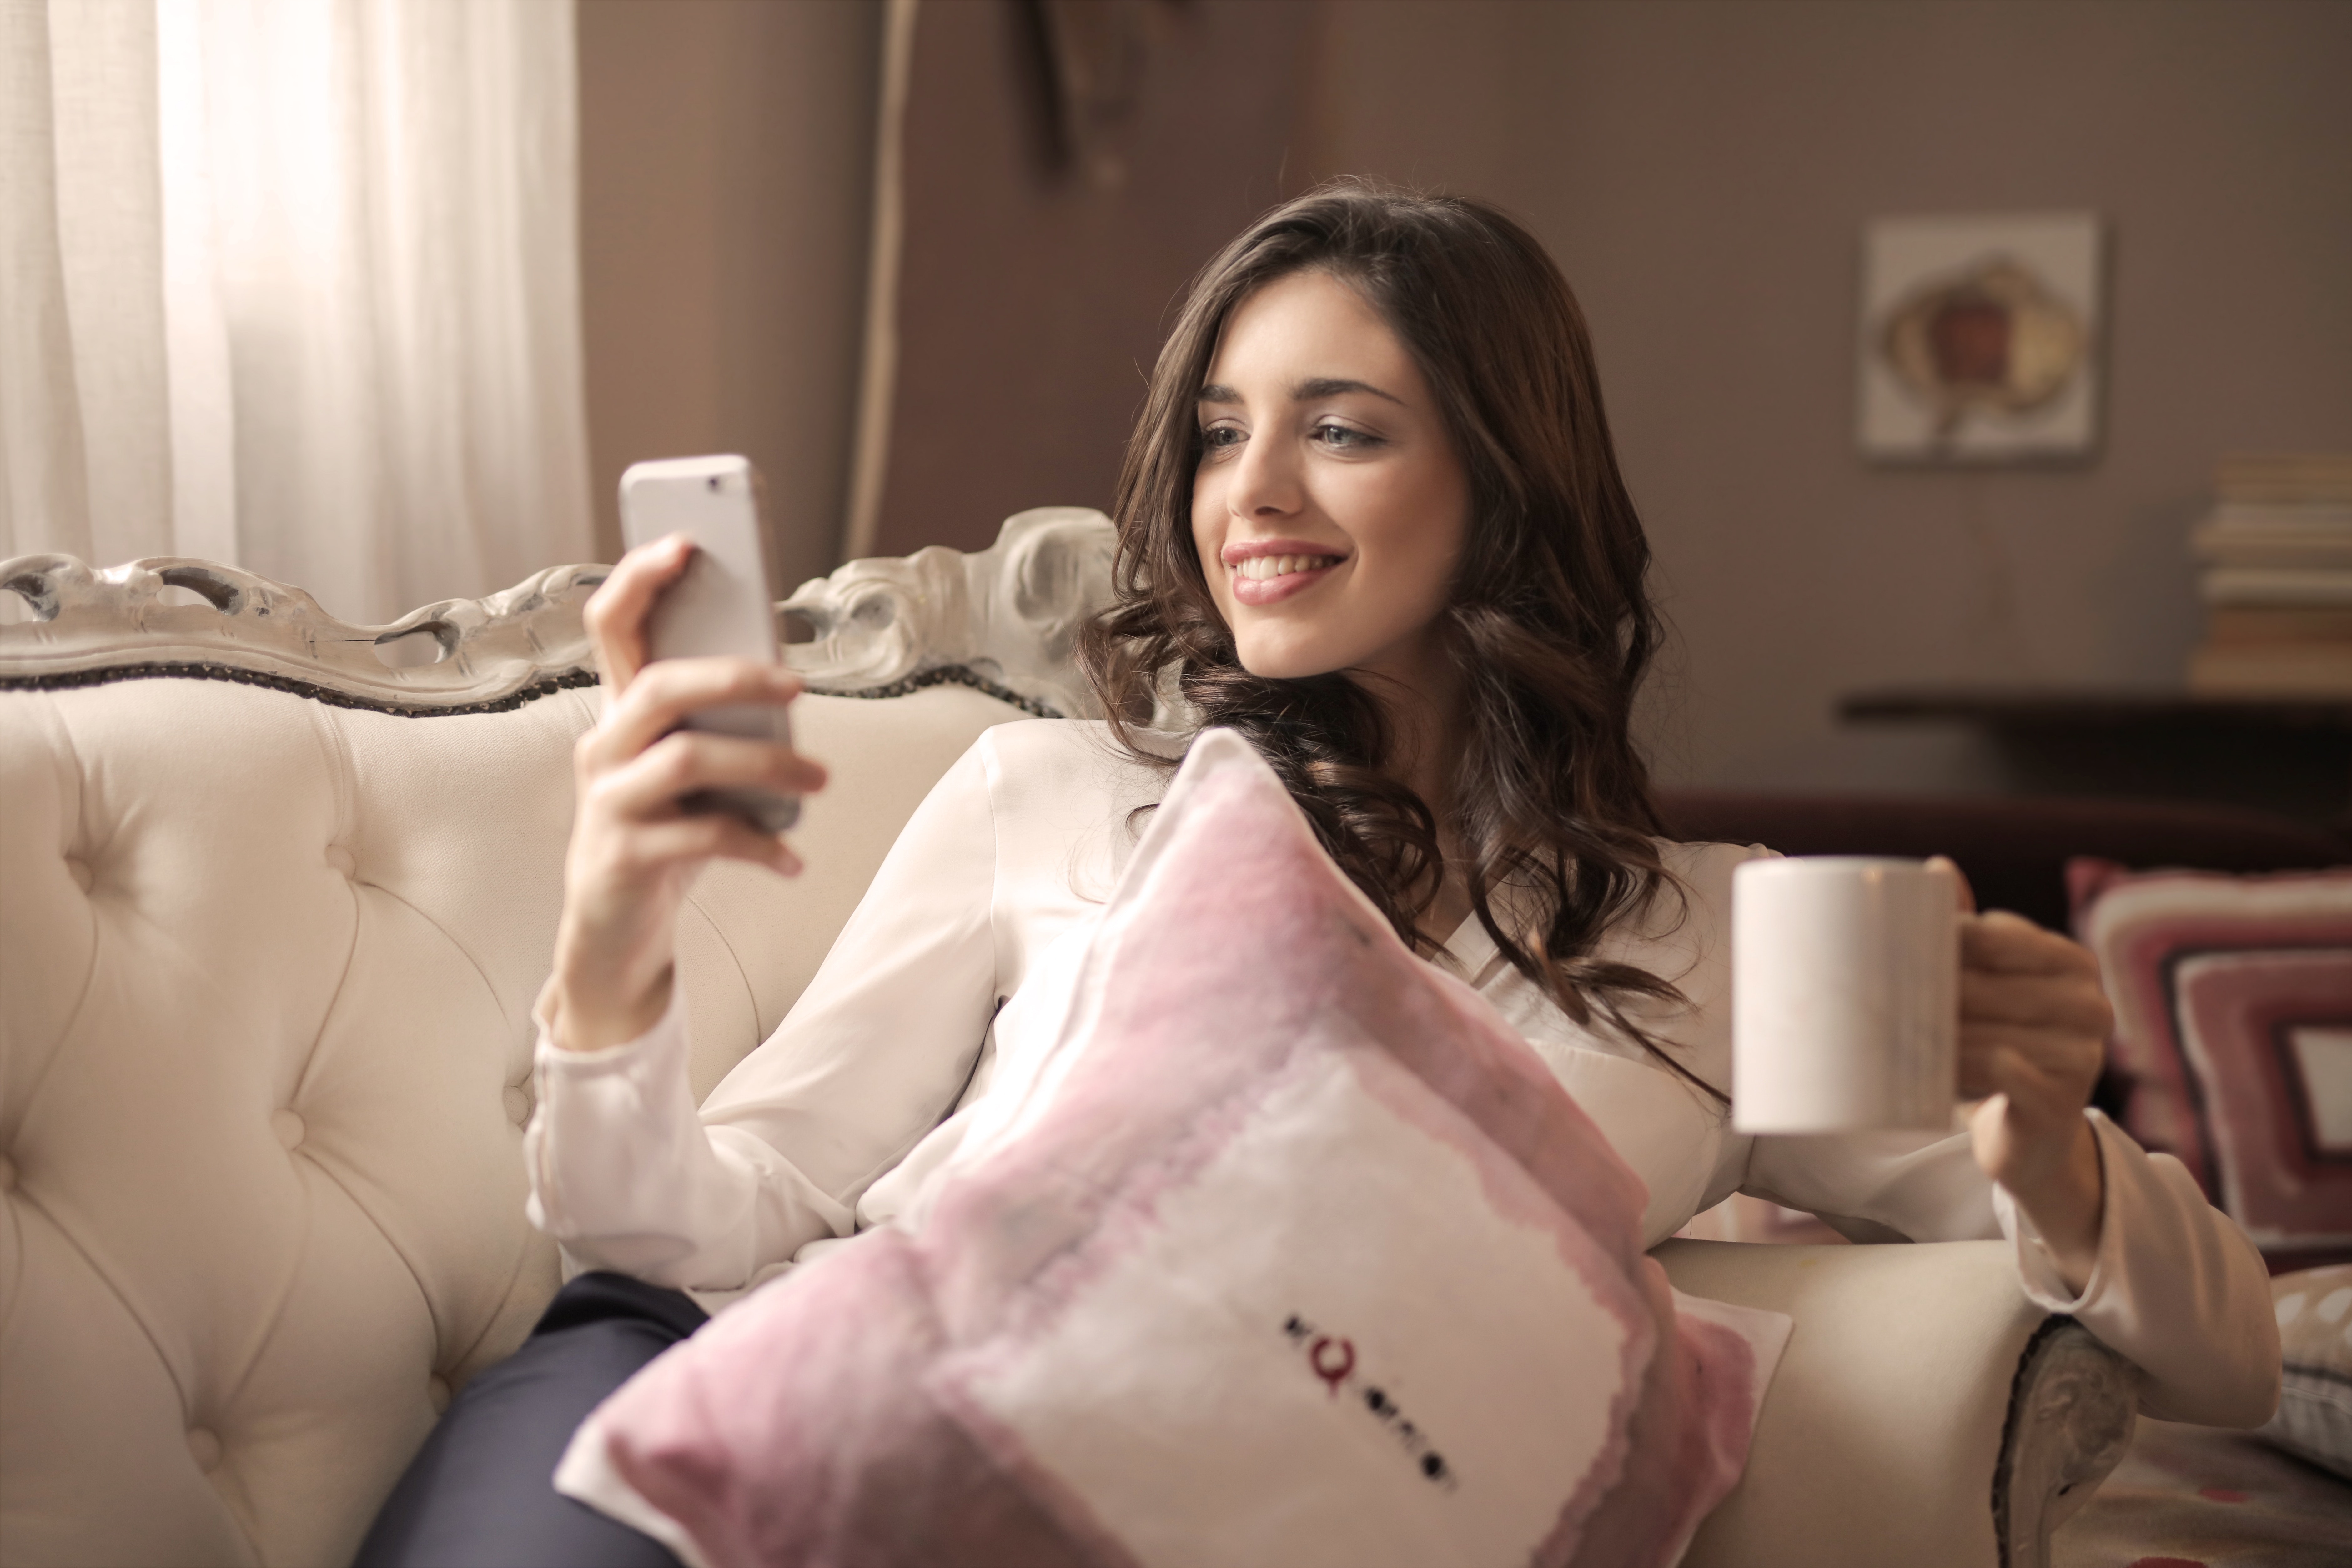 Woman in white long-sleeved shirt holding smartphone sitting on tufted sofa photo